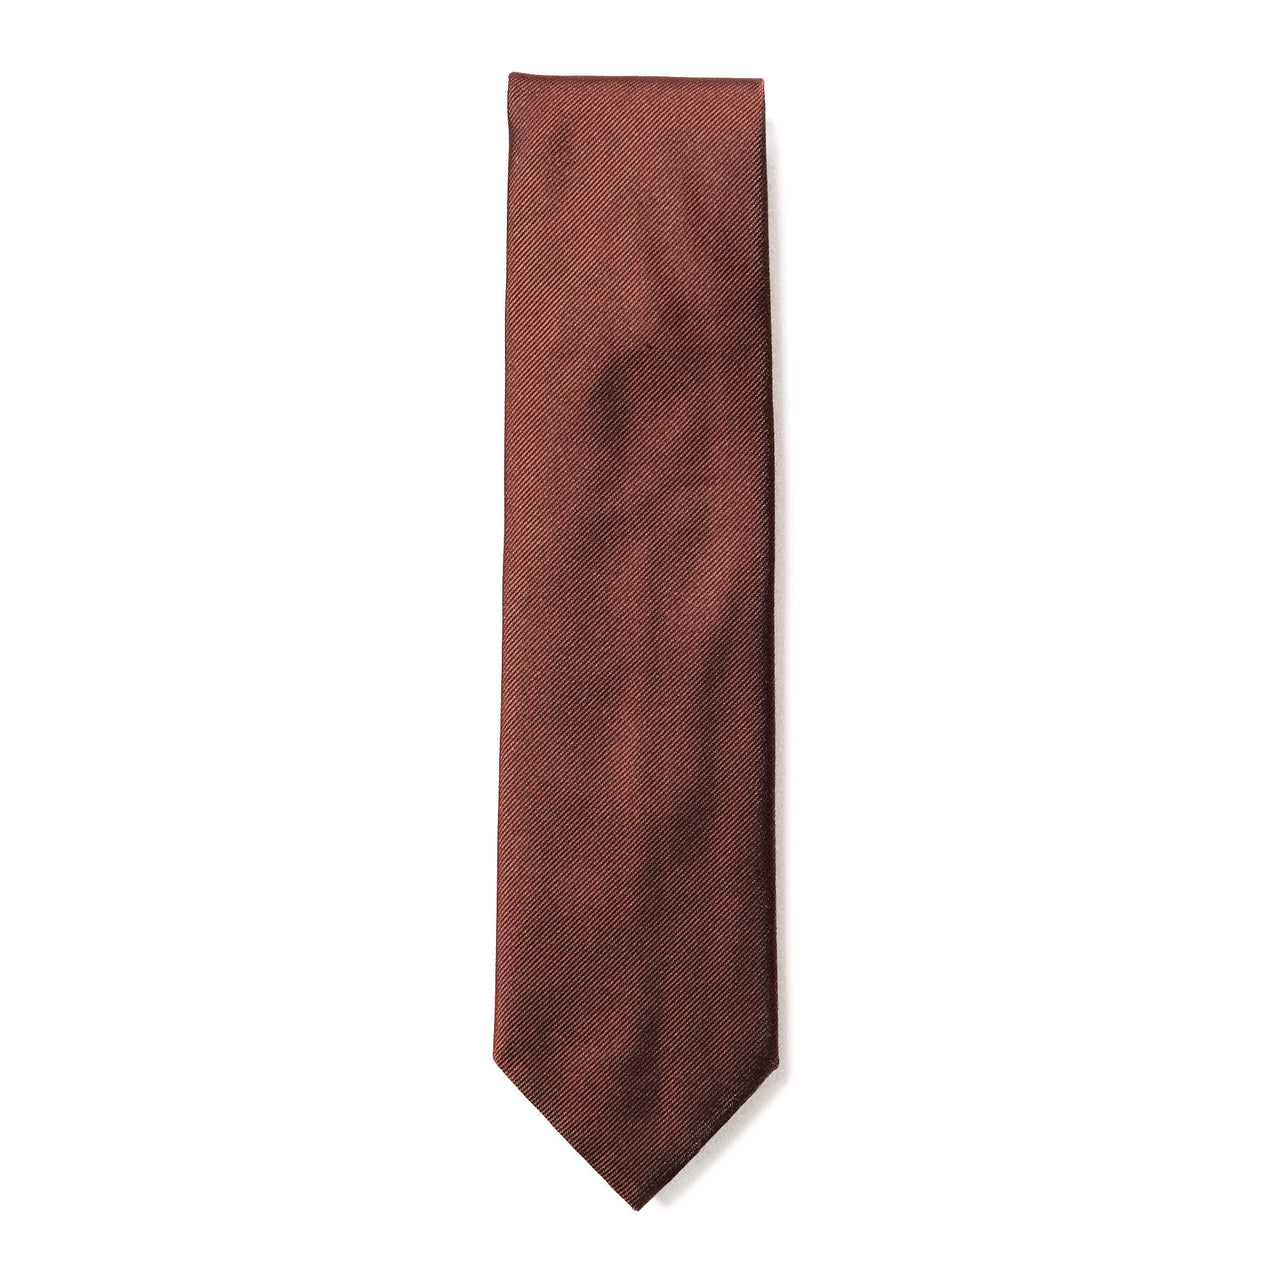 HENRY SARTORIAL X CANTINI Plain Woven Tie BROWN